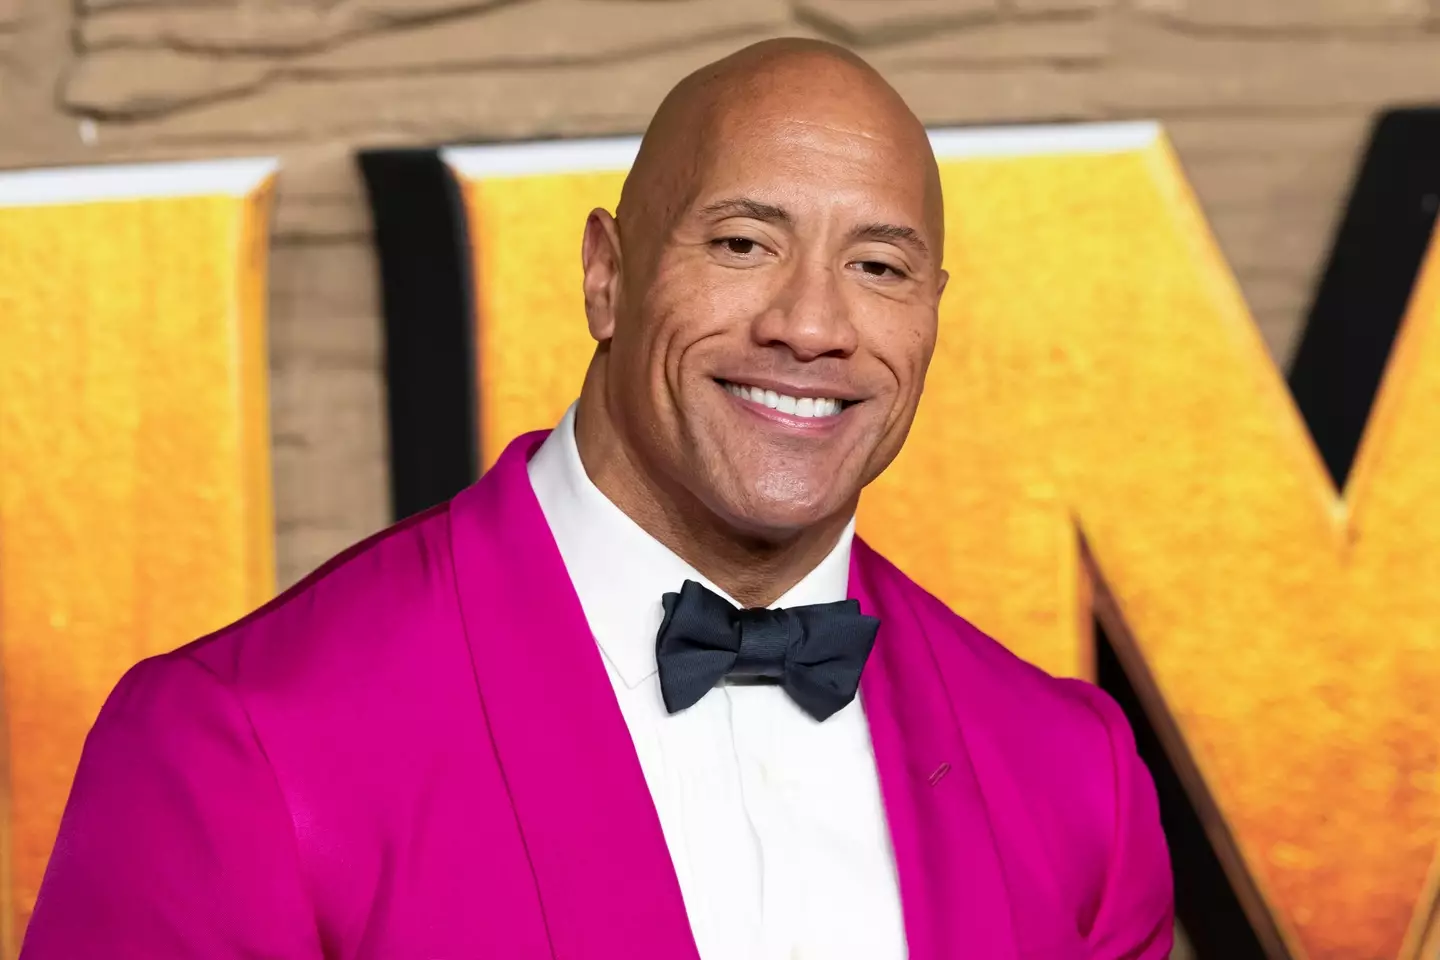 The Rock at the premiere of 'Jumanji: The Next Level' in 2019. (Image